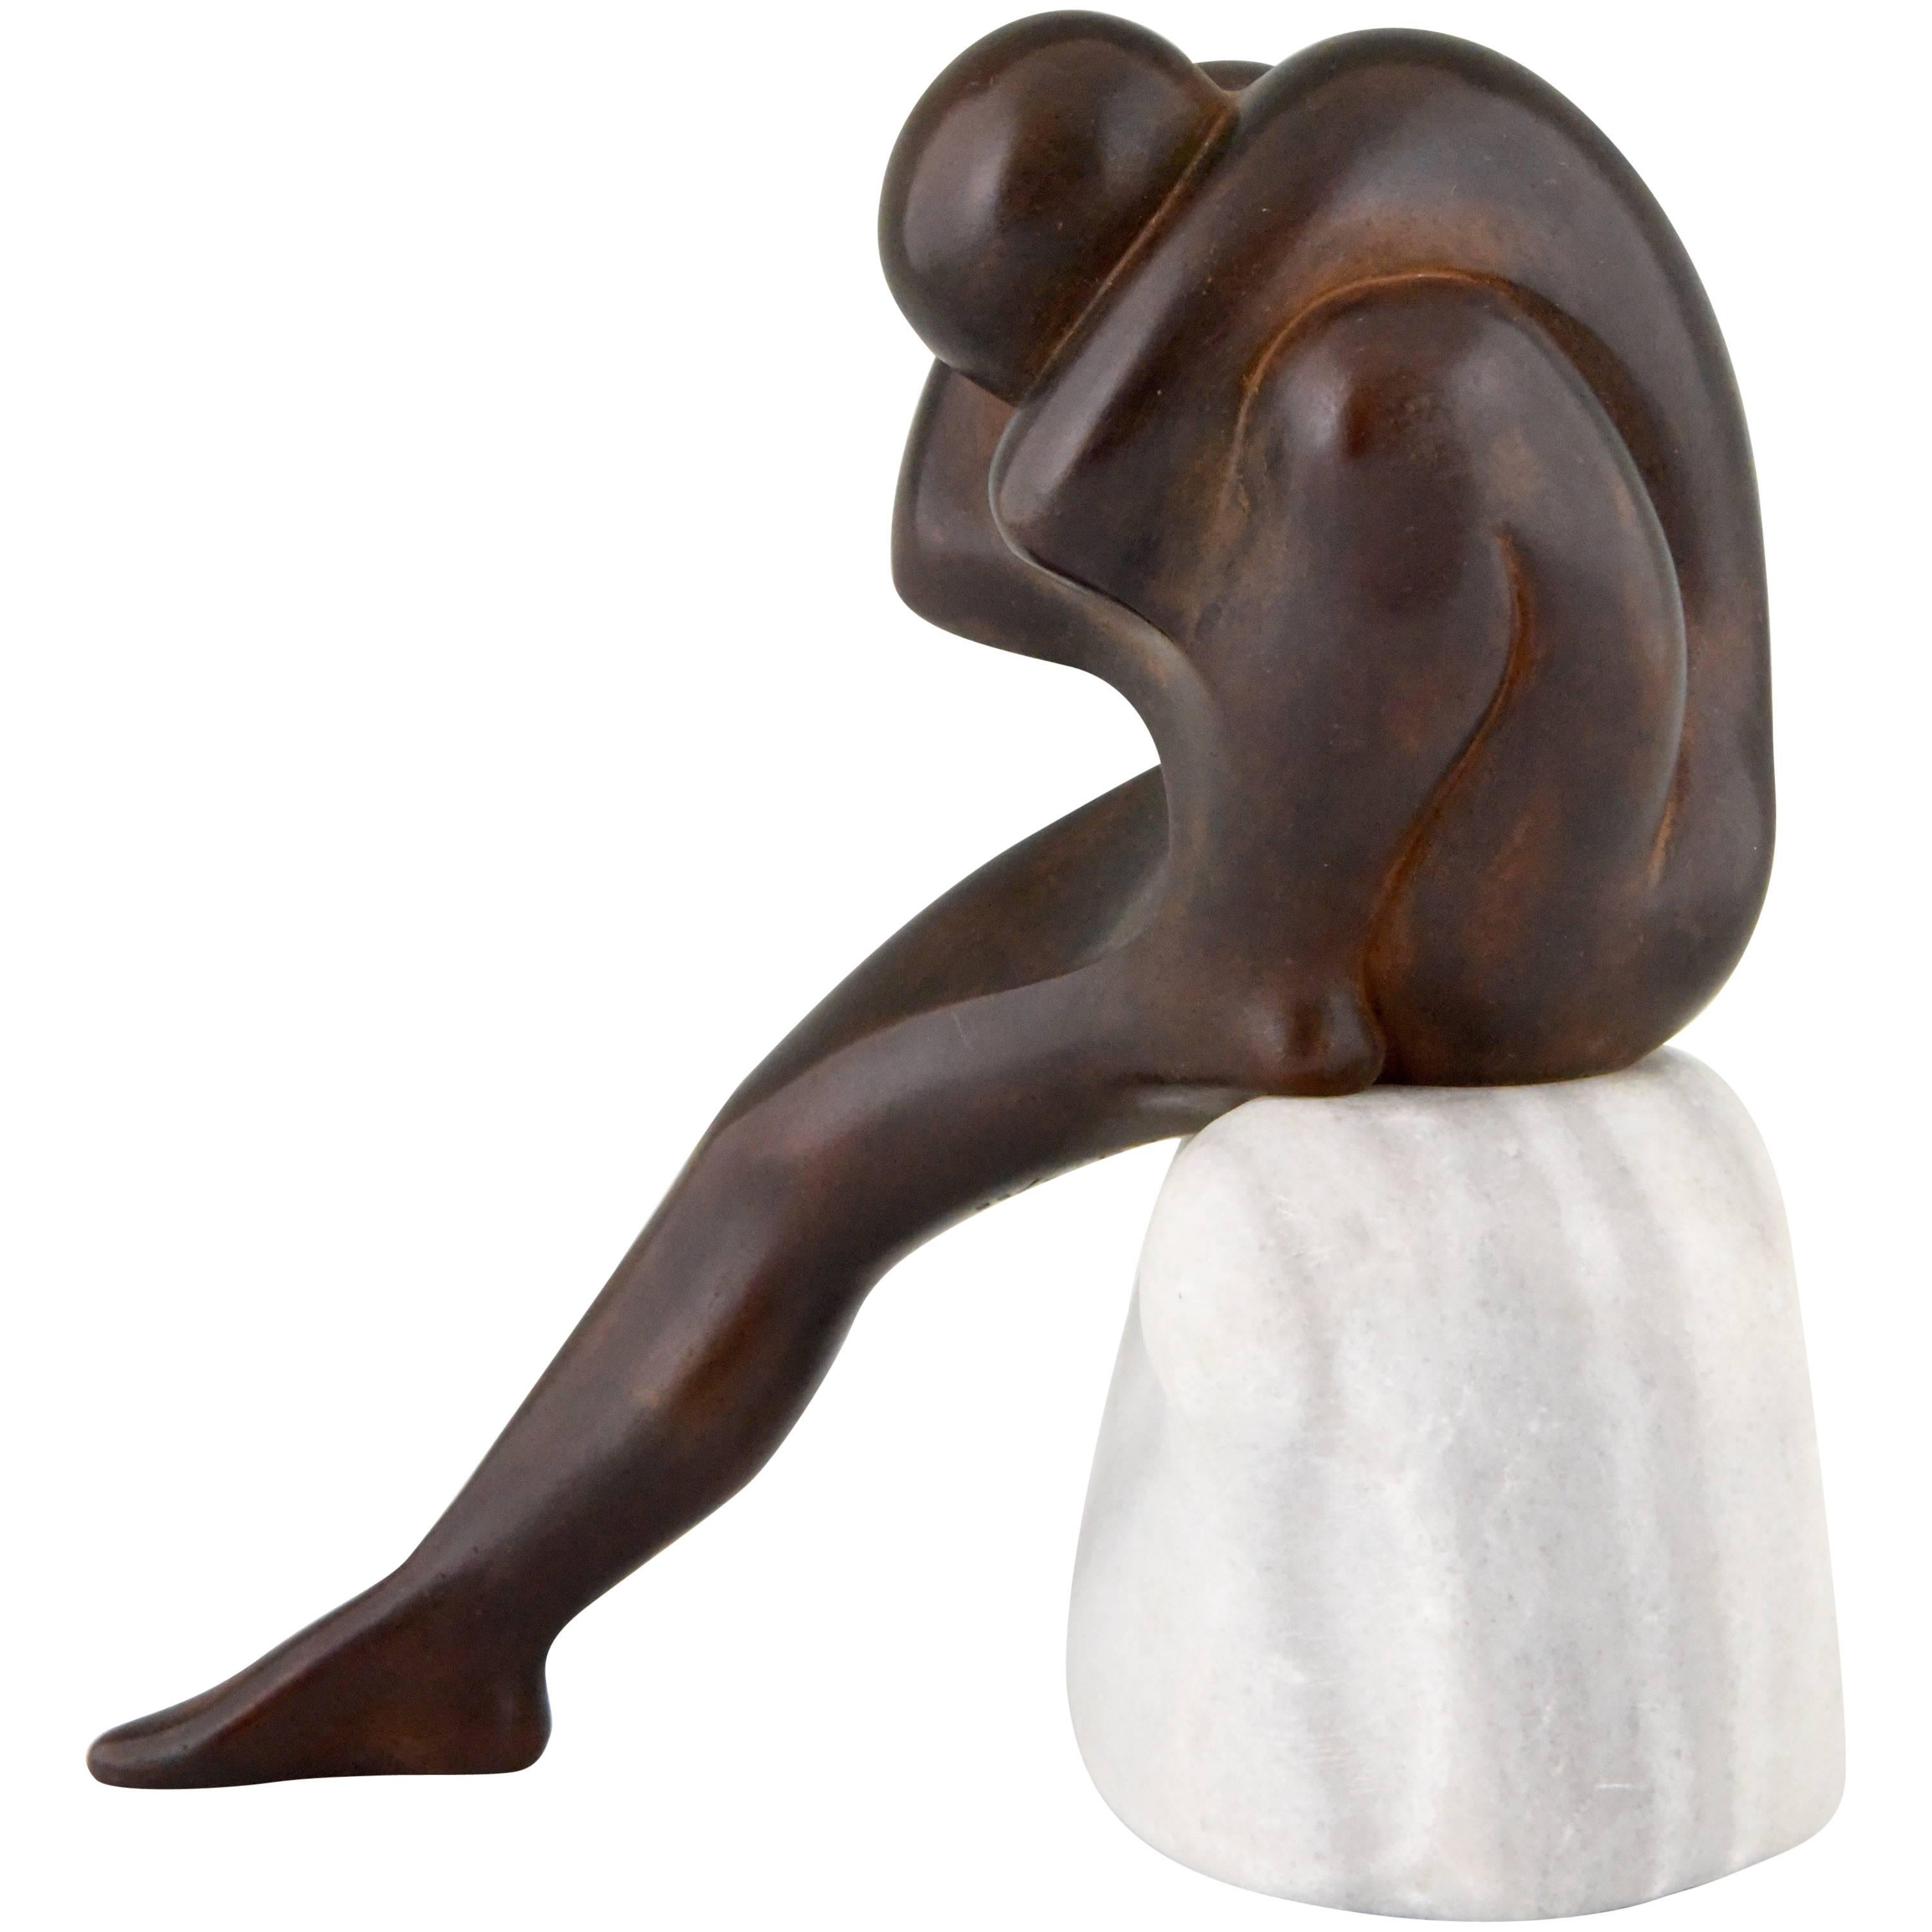 L' Uomo, Bronze Sculpture of a Sitting Man Marble Base by Selvino Cavezza, 1985